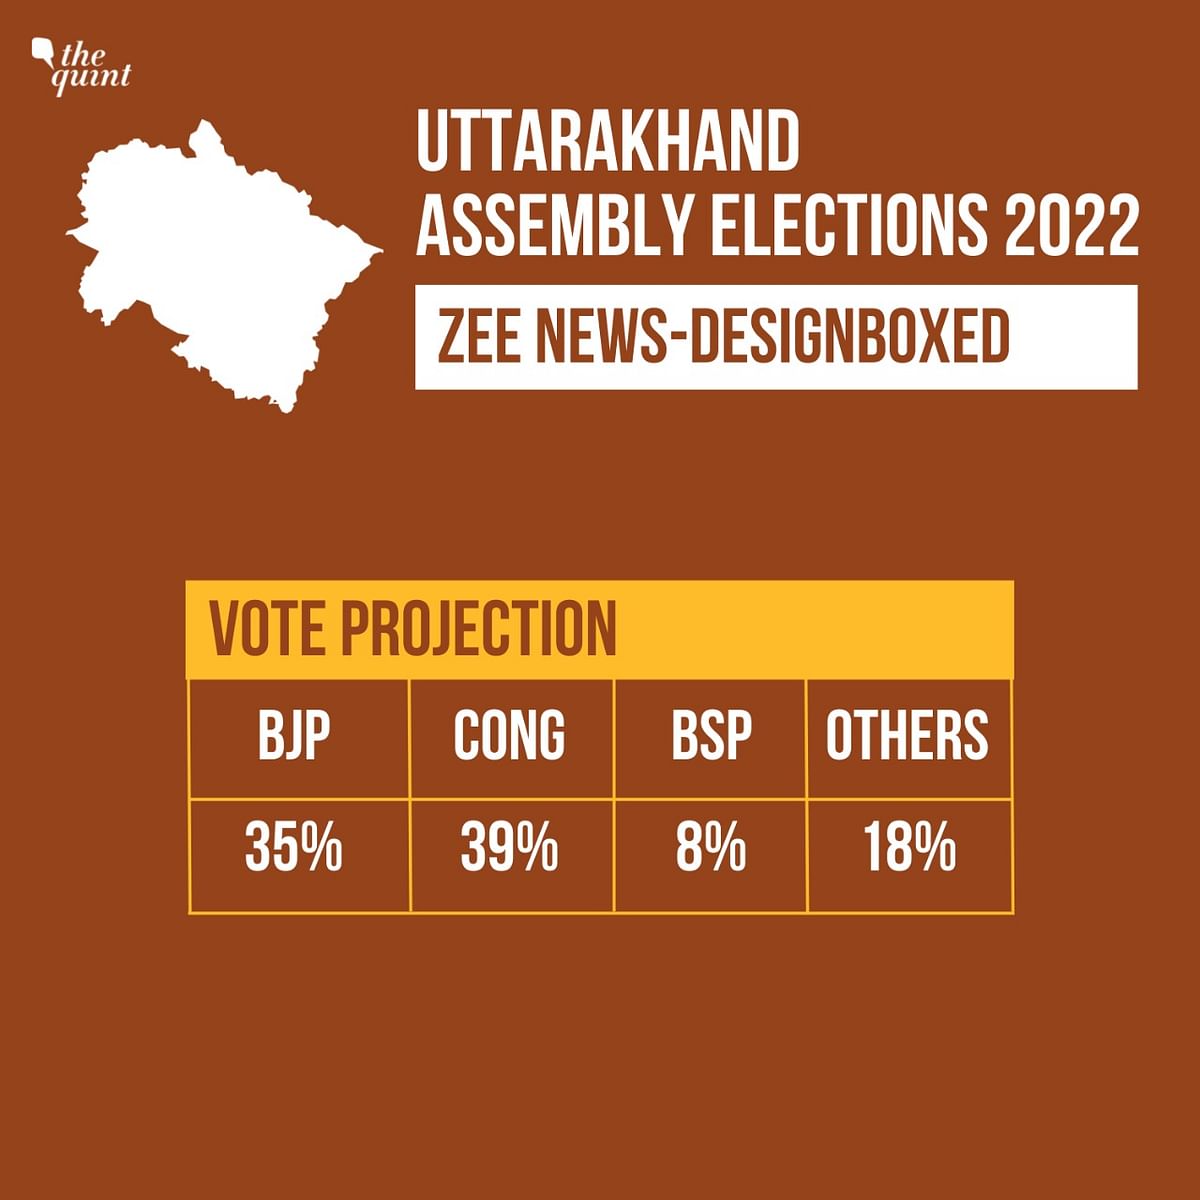 Catch the exit poll results for the Uttarakhand Assembly elections here.